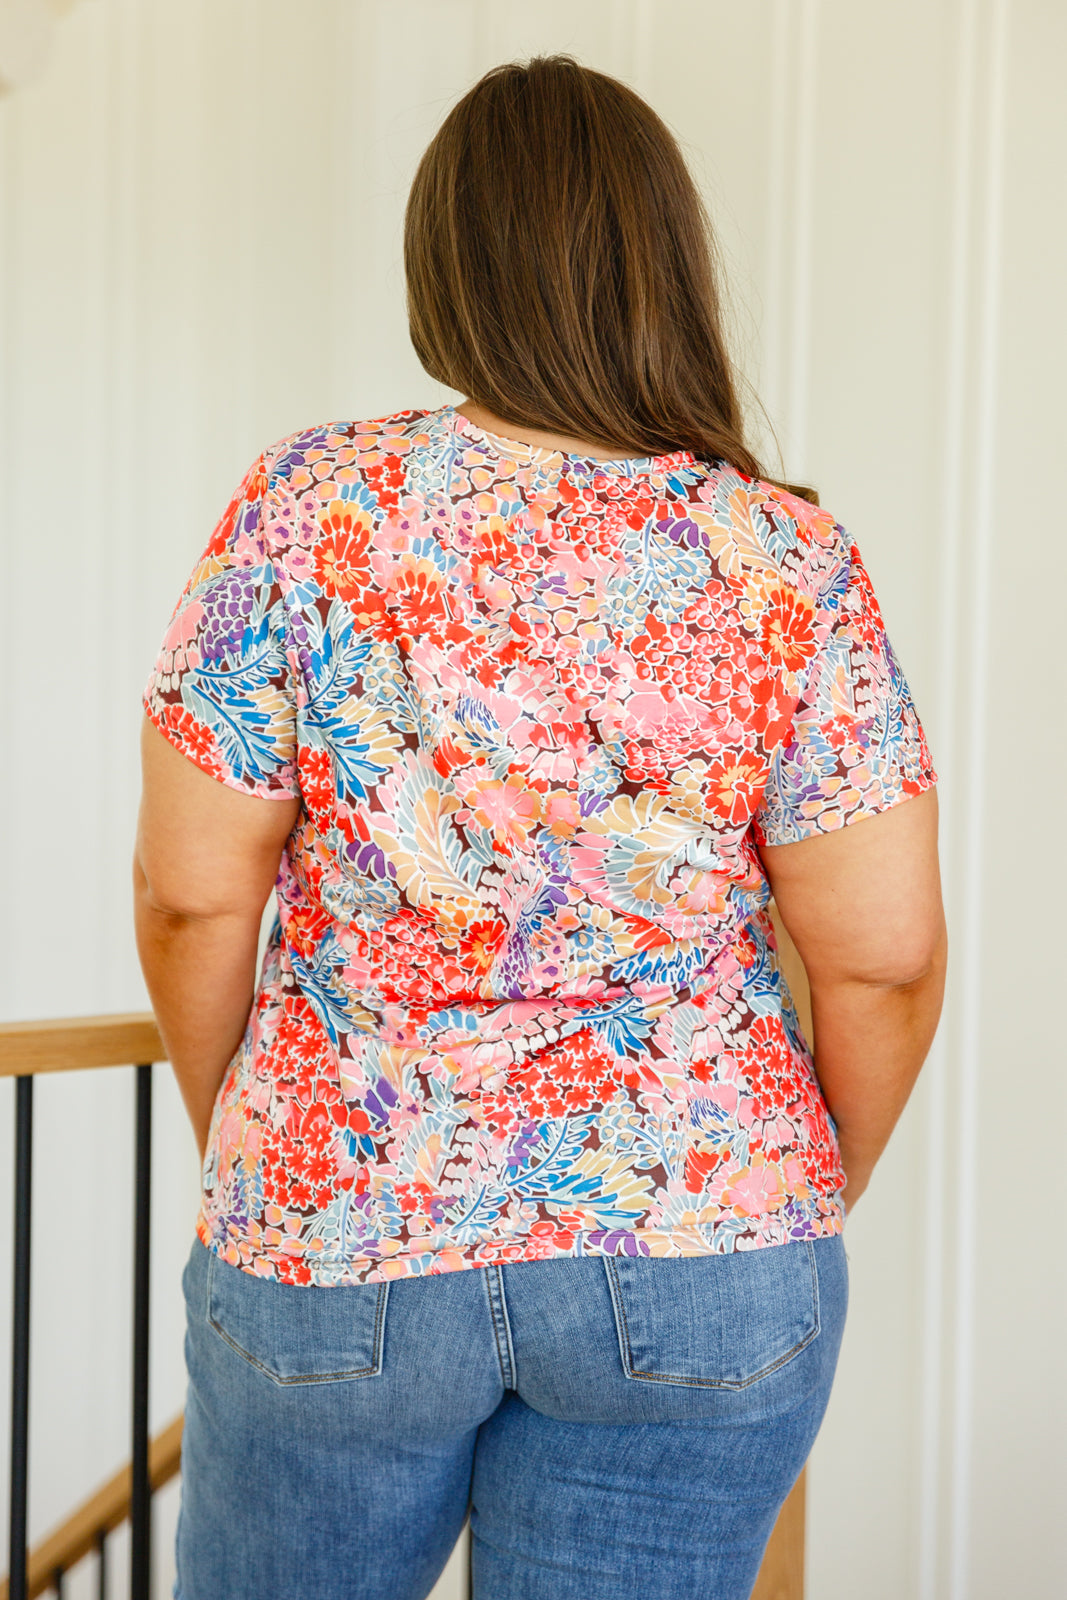 Flowers Everywhere Floral Top - Southern Divas Boutique